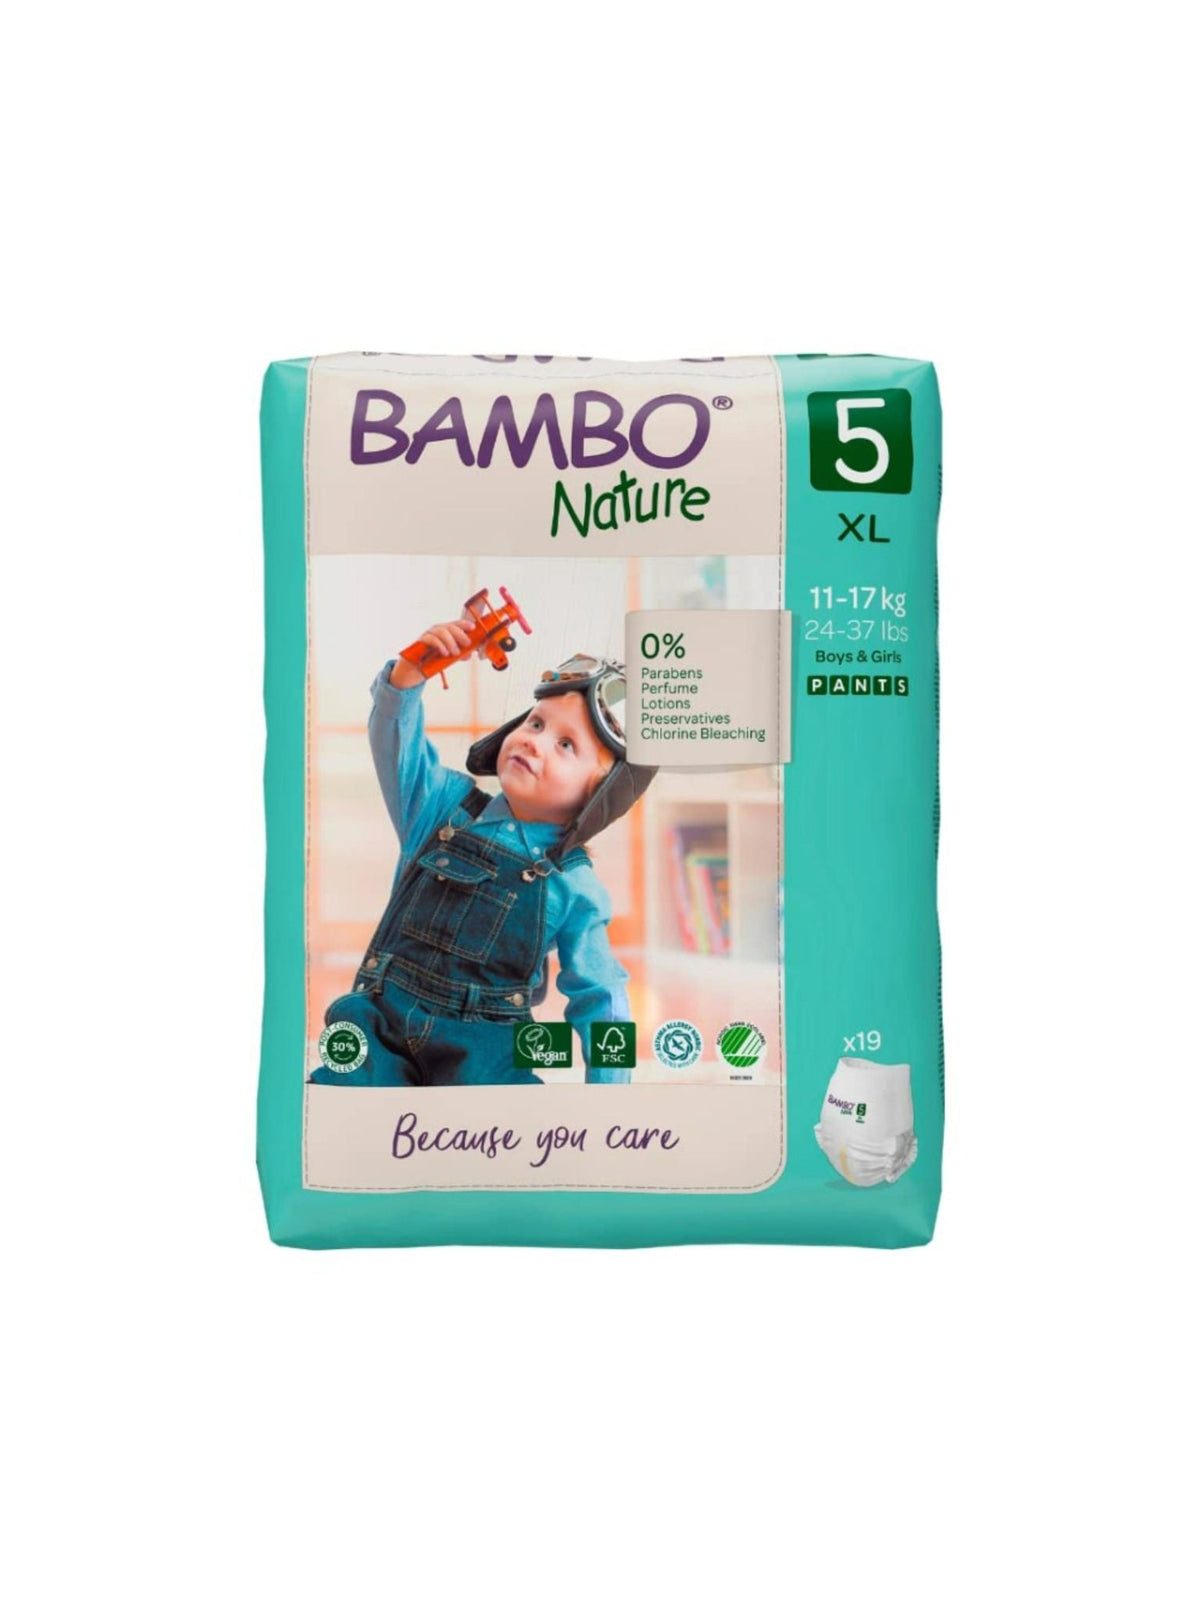 Bamboo Nature Pant  Diaper For Boys And Girls Pack Of 19 Size - Xl - EKJB0006